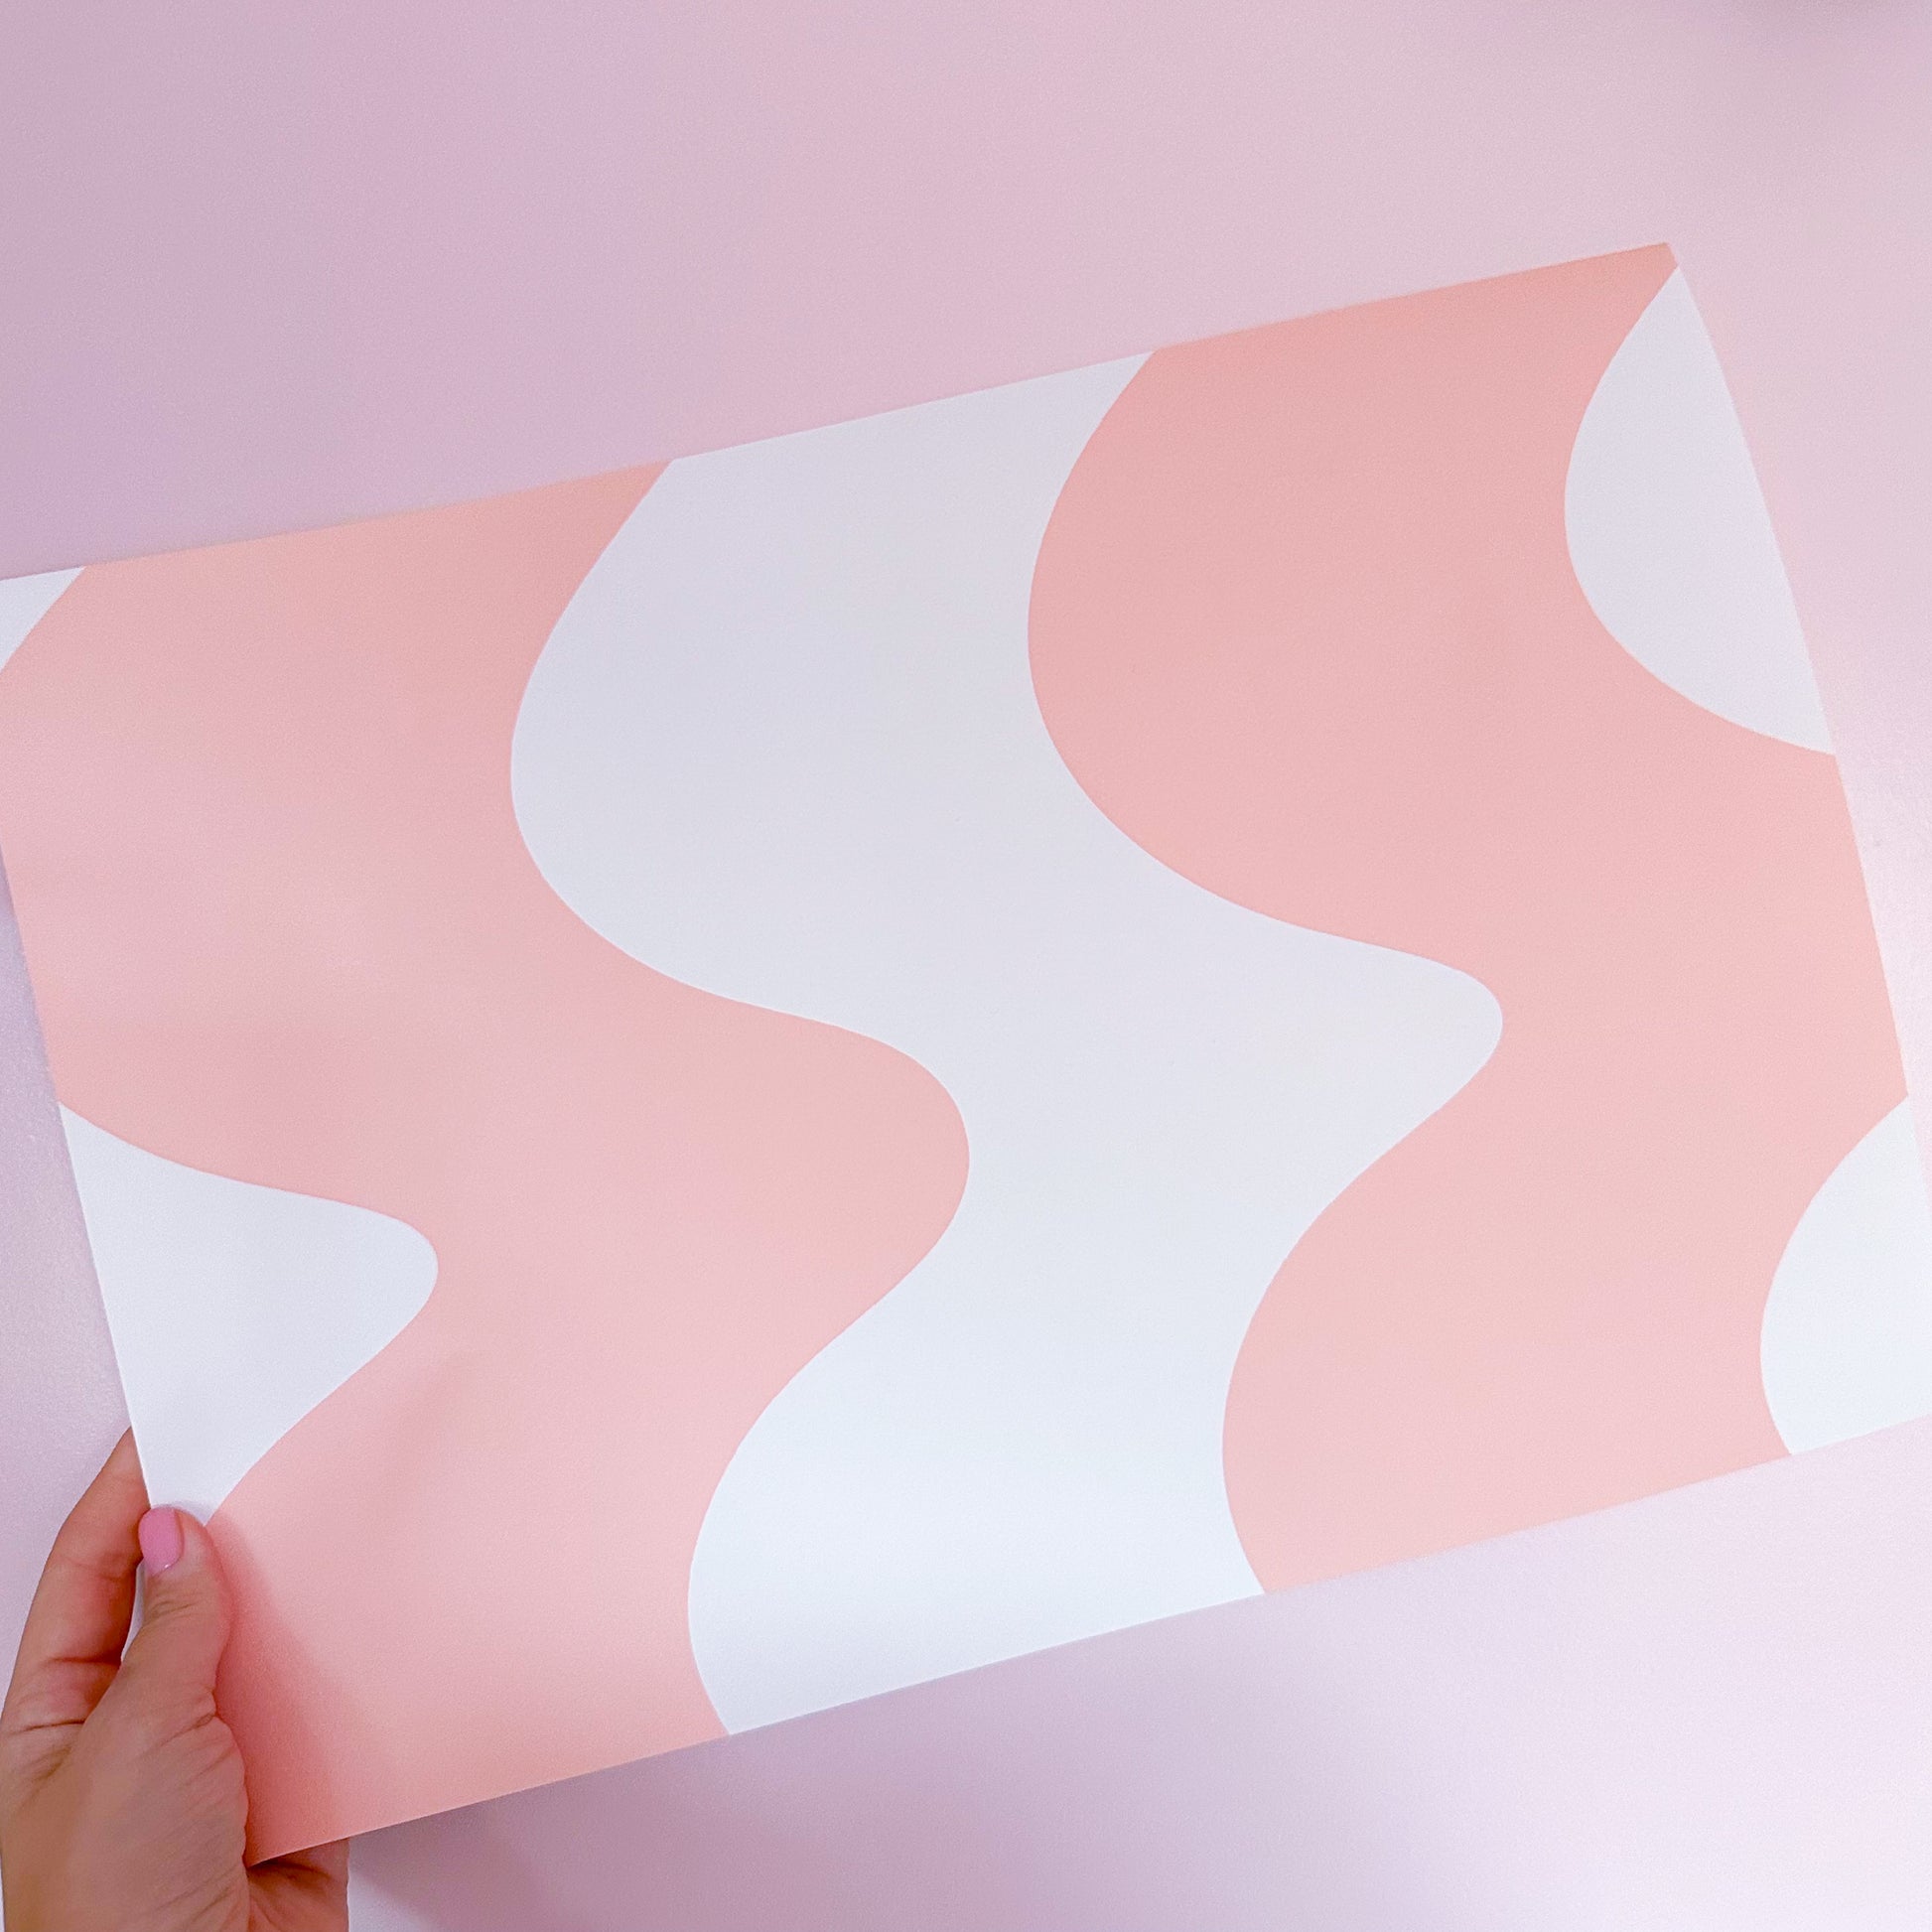 peach colour wallpaper for walls with abstract wavy pattern 